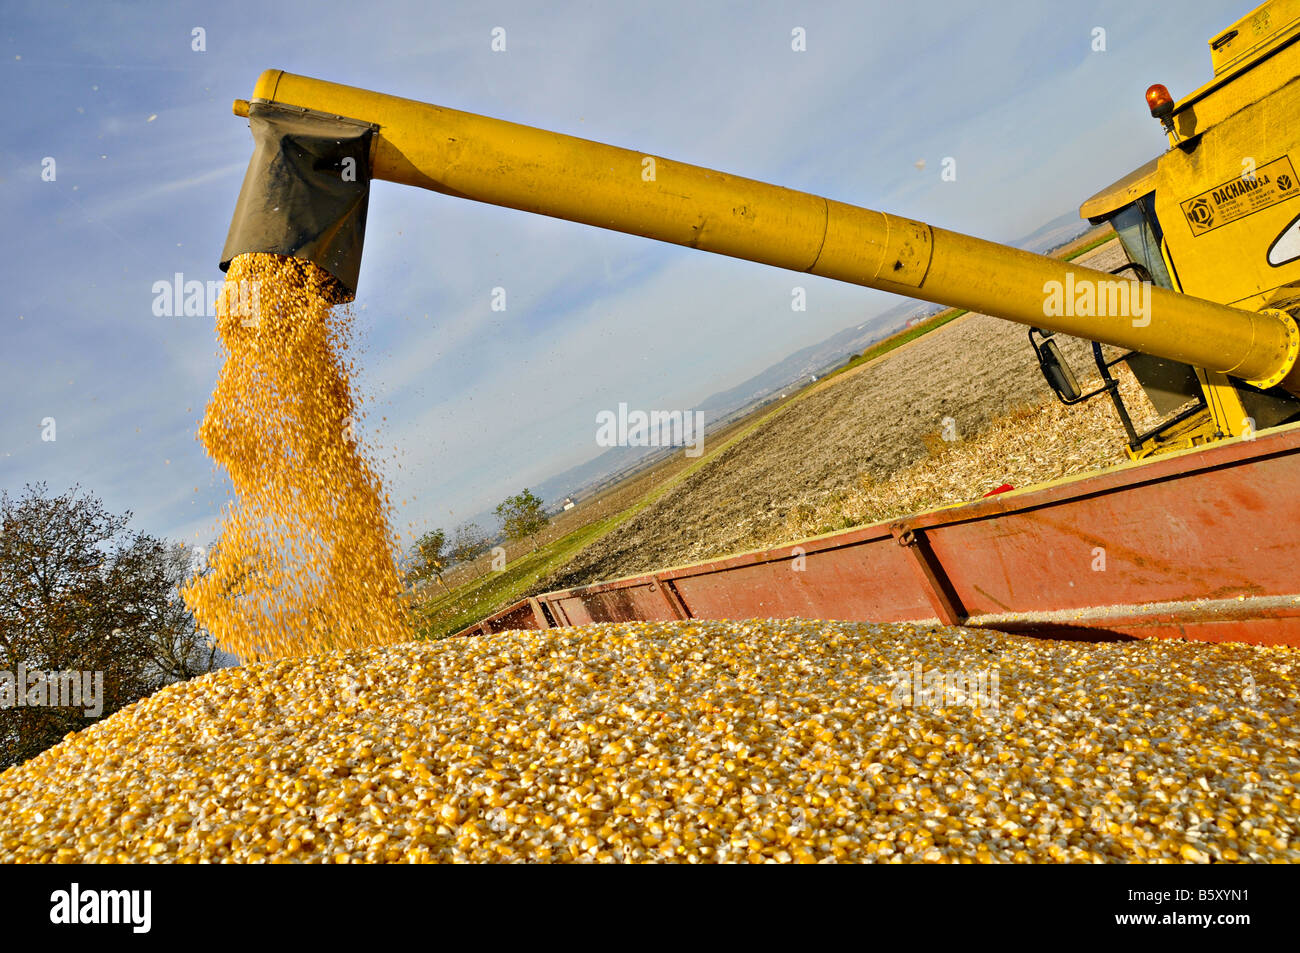 Combine harvest unloading maize (corn) in a trailer,  France. Stock Photo